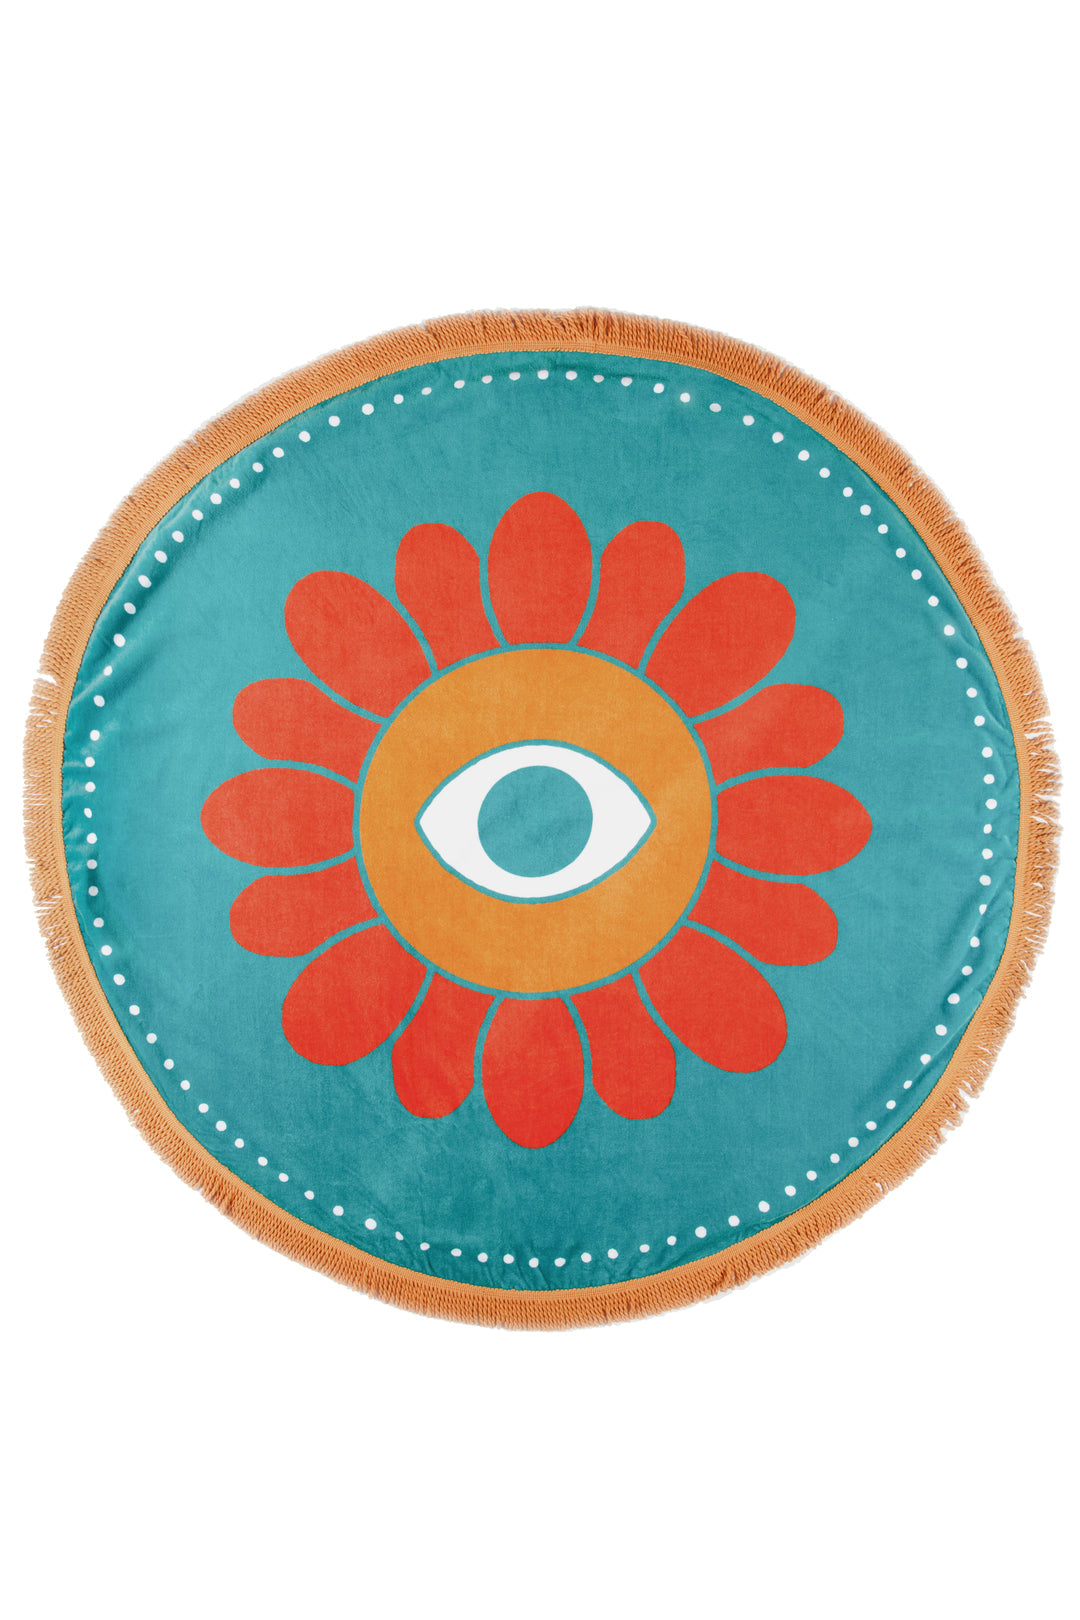 THE FLOWER POWER ROUND TOWEL